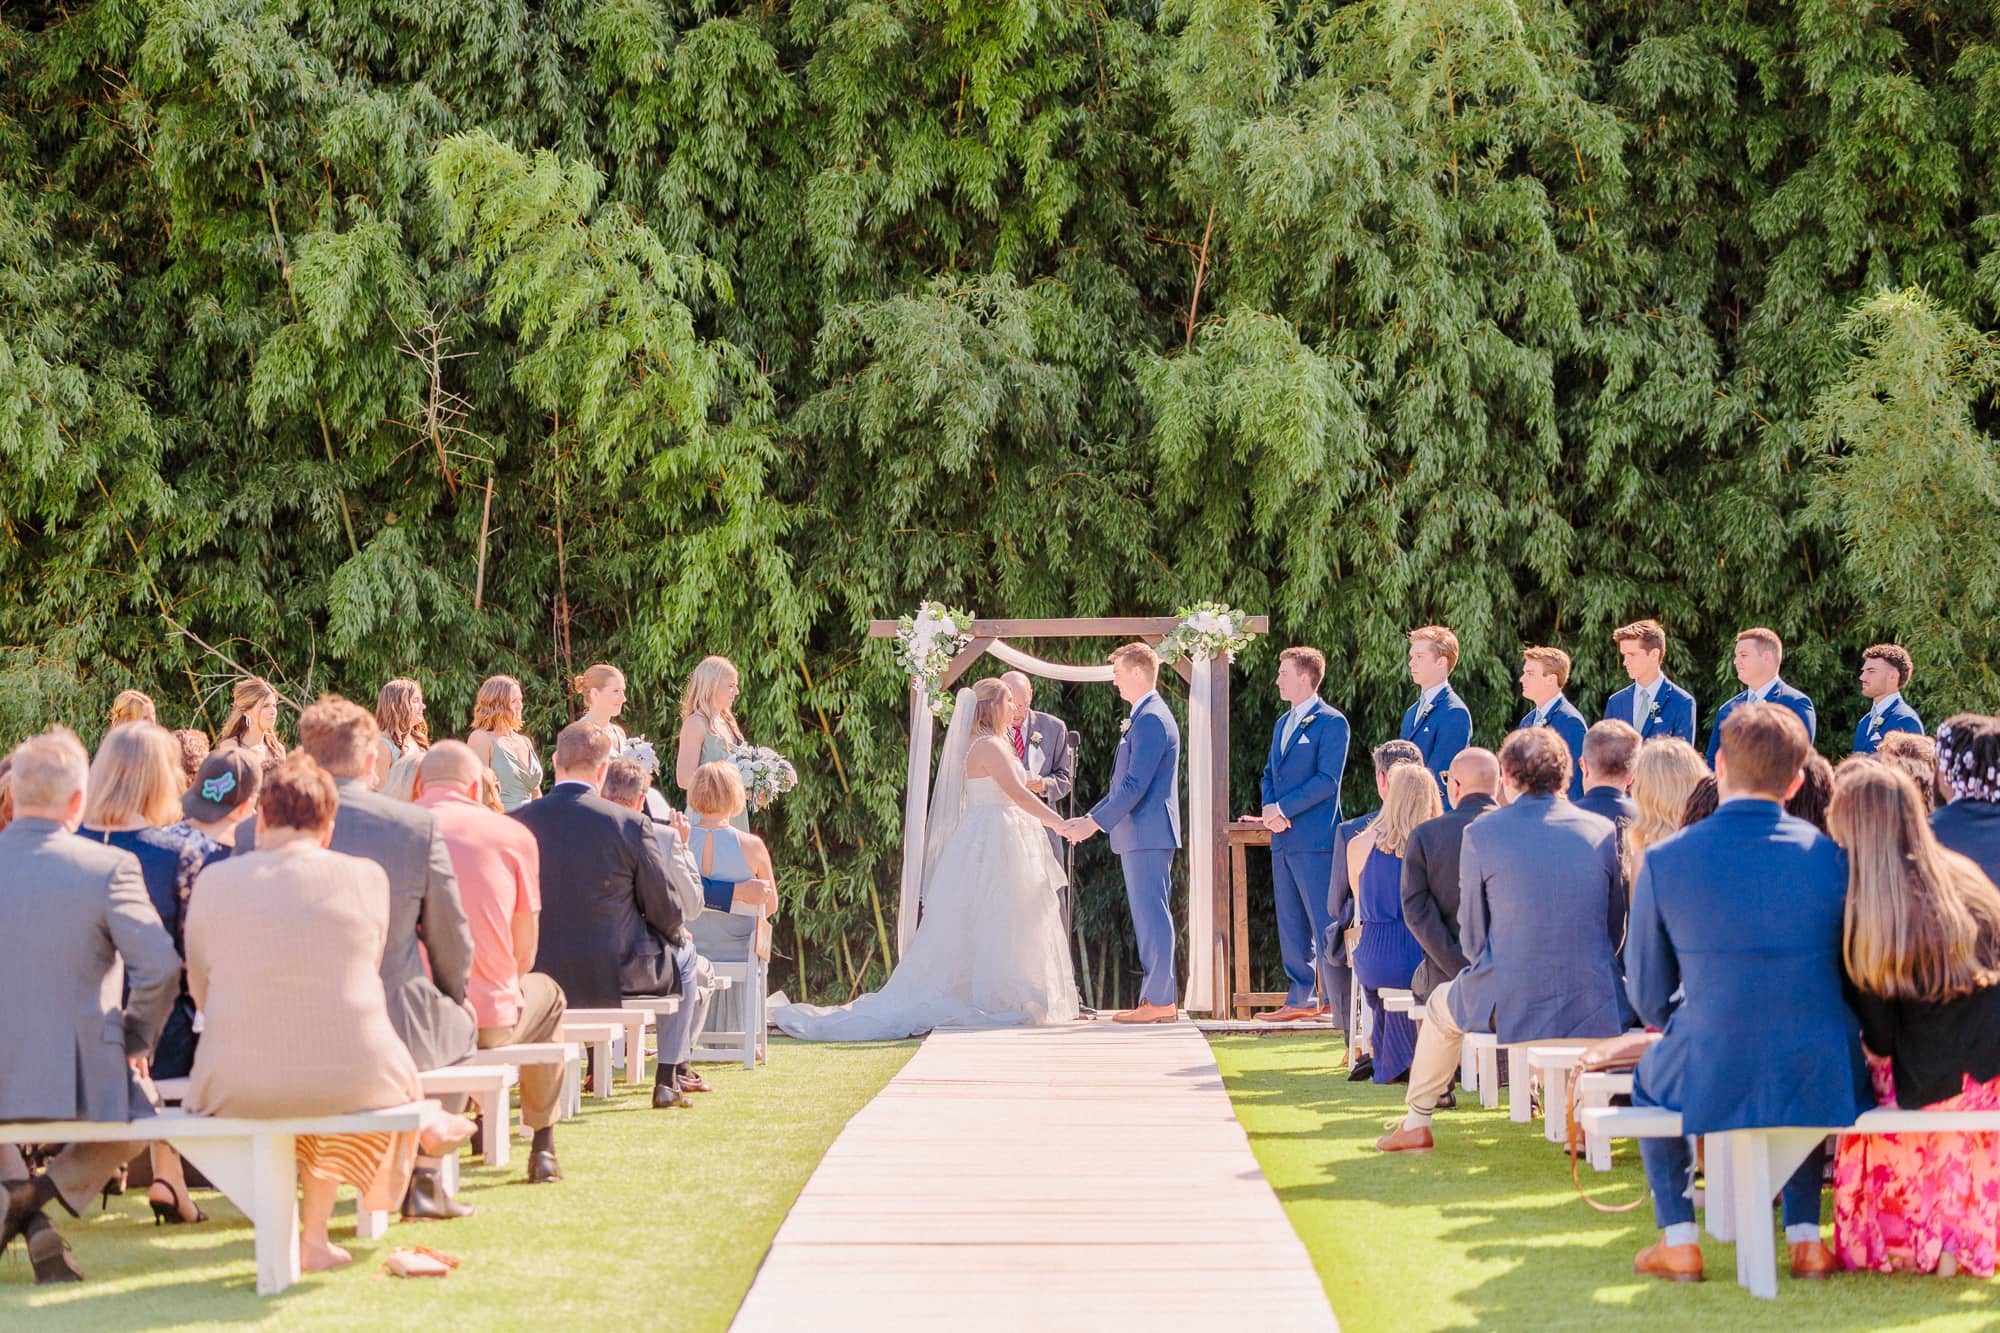 Even though they had a barn wedding venue, they held their ceremony in front of the bamboo forest.